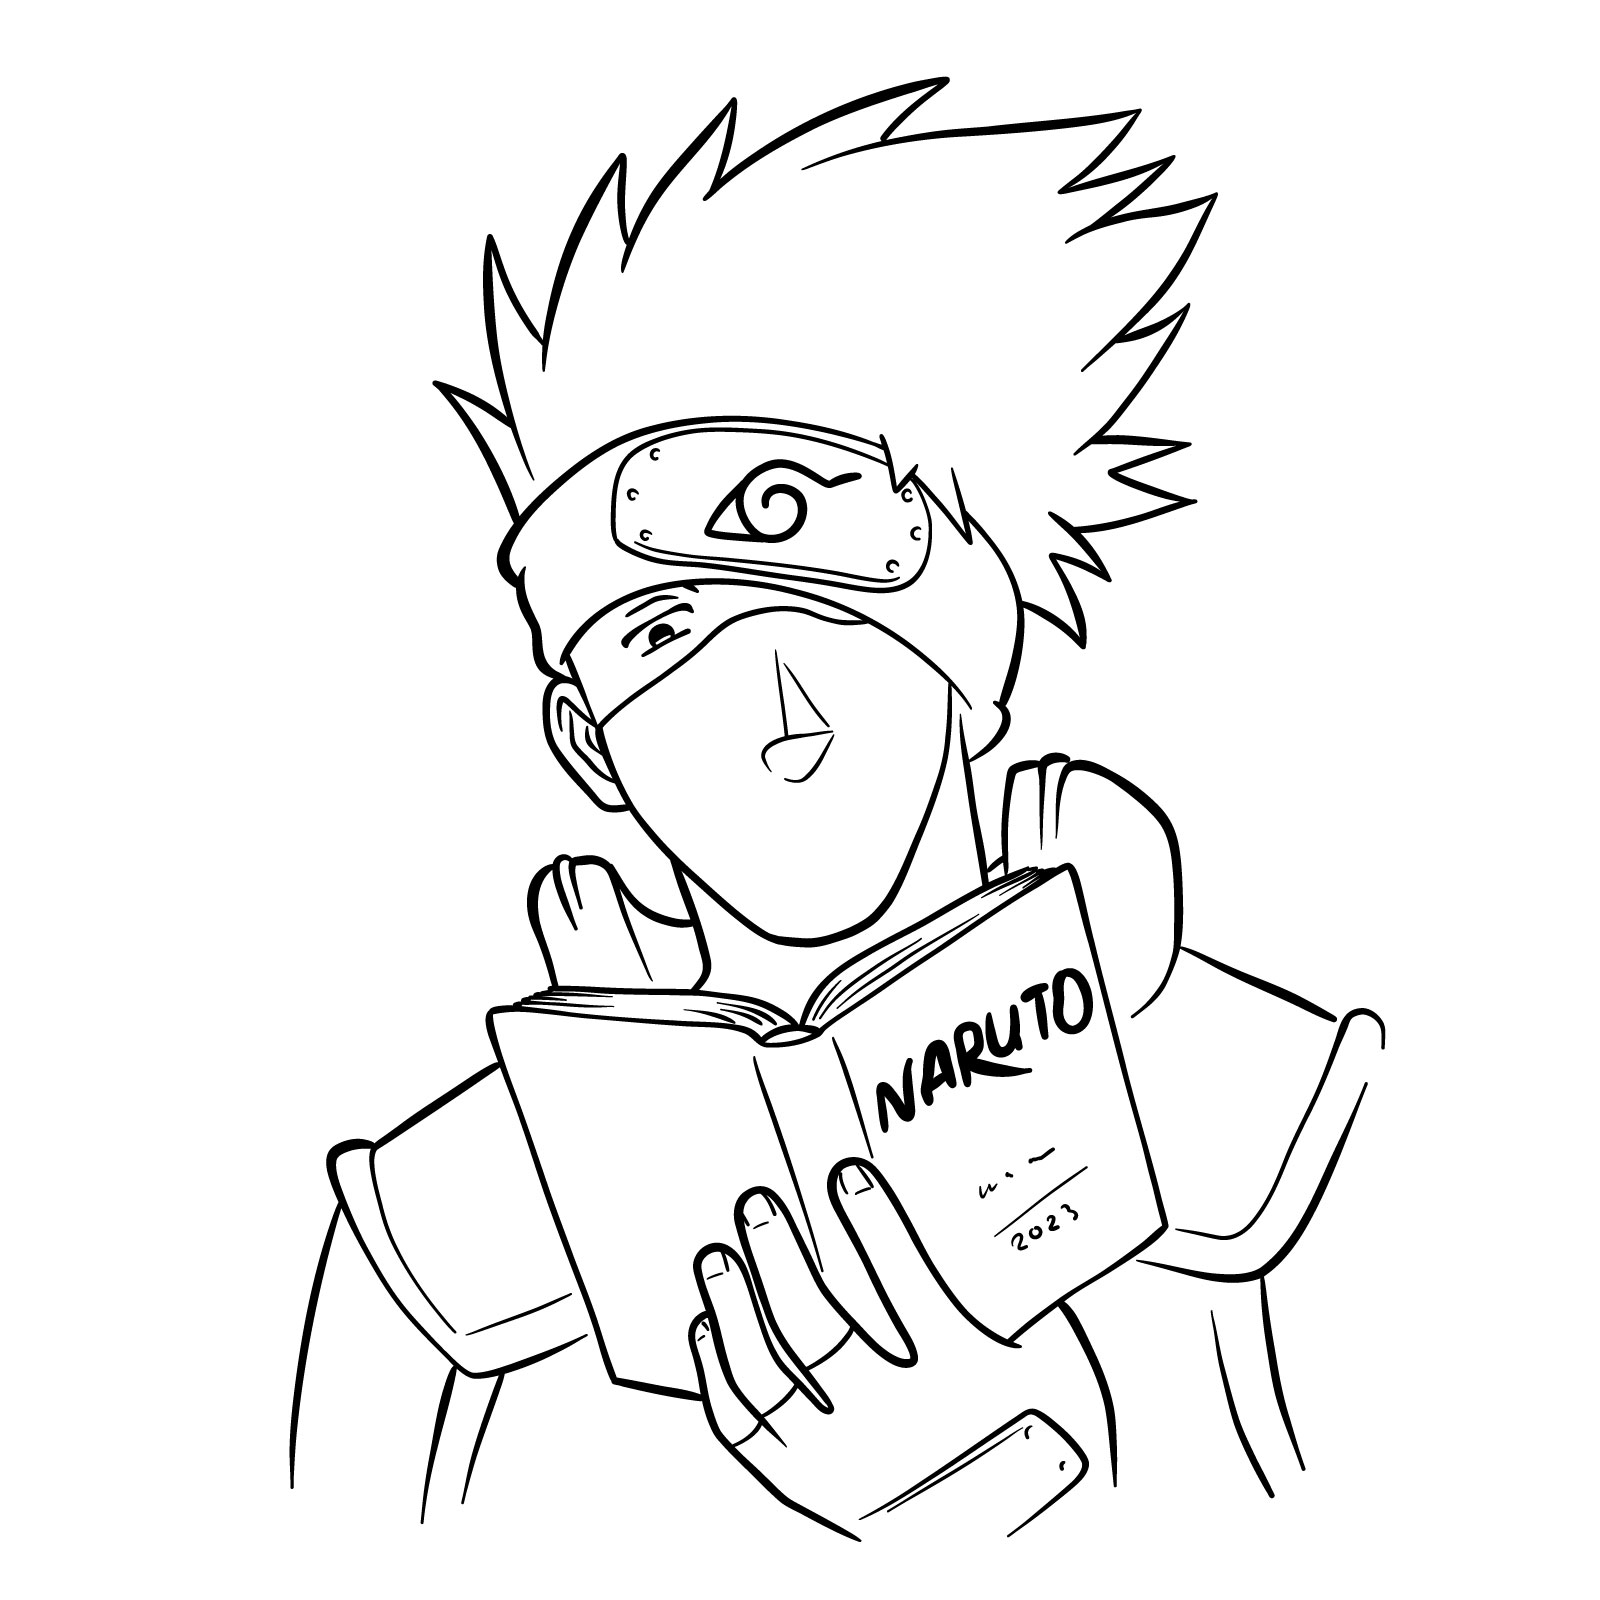 How to draw Kakashi reading a book - final step